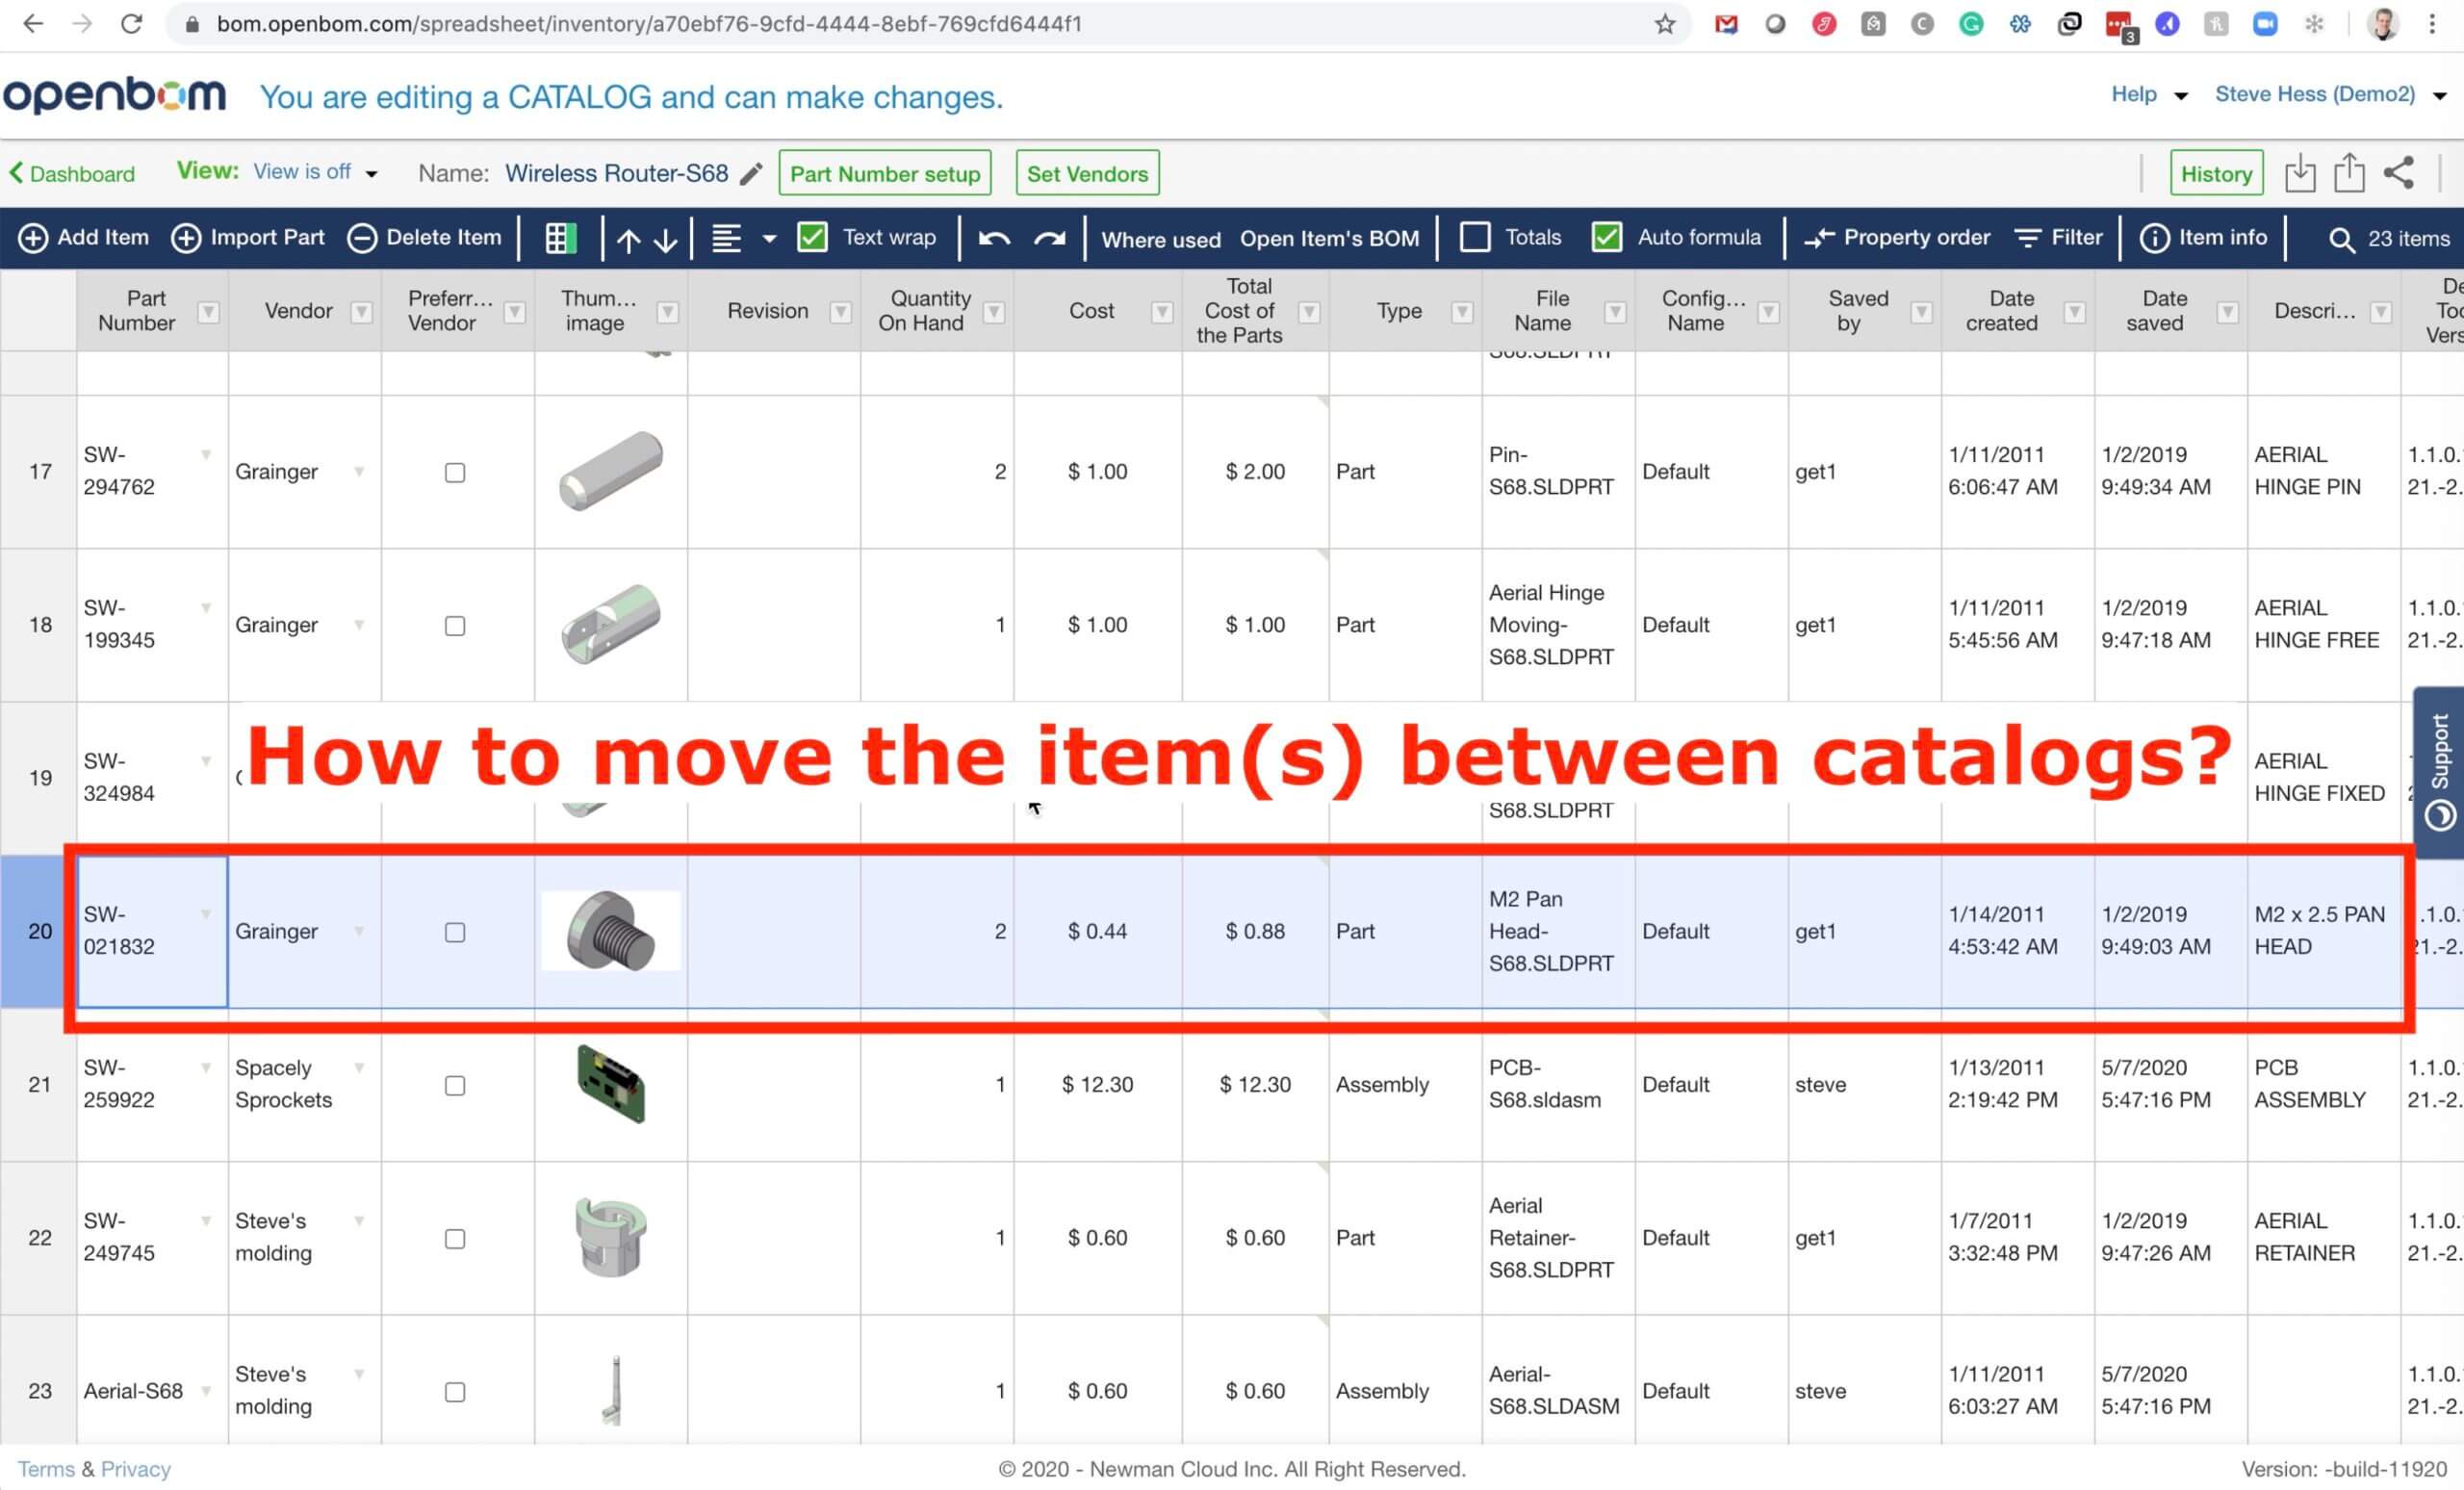 VIDEO TIP: How to move items between two catalogs in OpenBOM